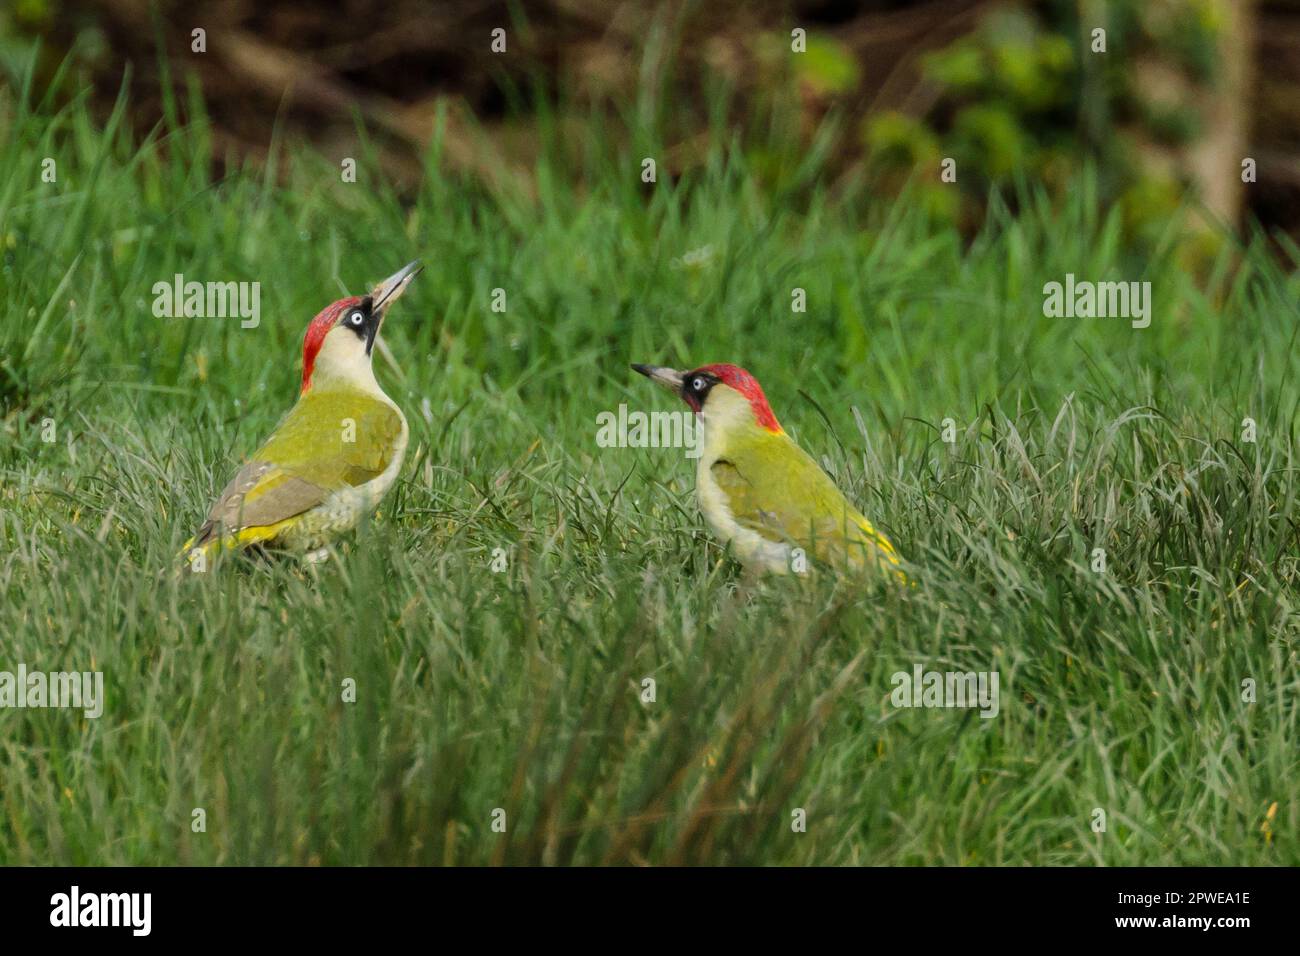 Female and Male European Green Woodpeckers, Picus viridis, on grass. Photo by Amanda Rose/Alamy Stock Photo